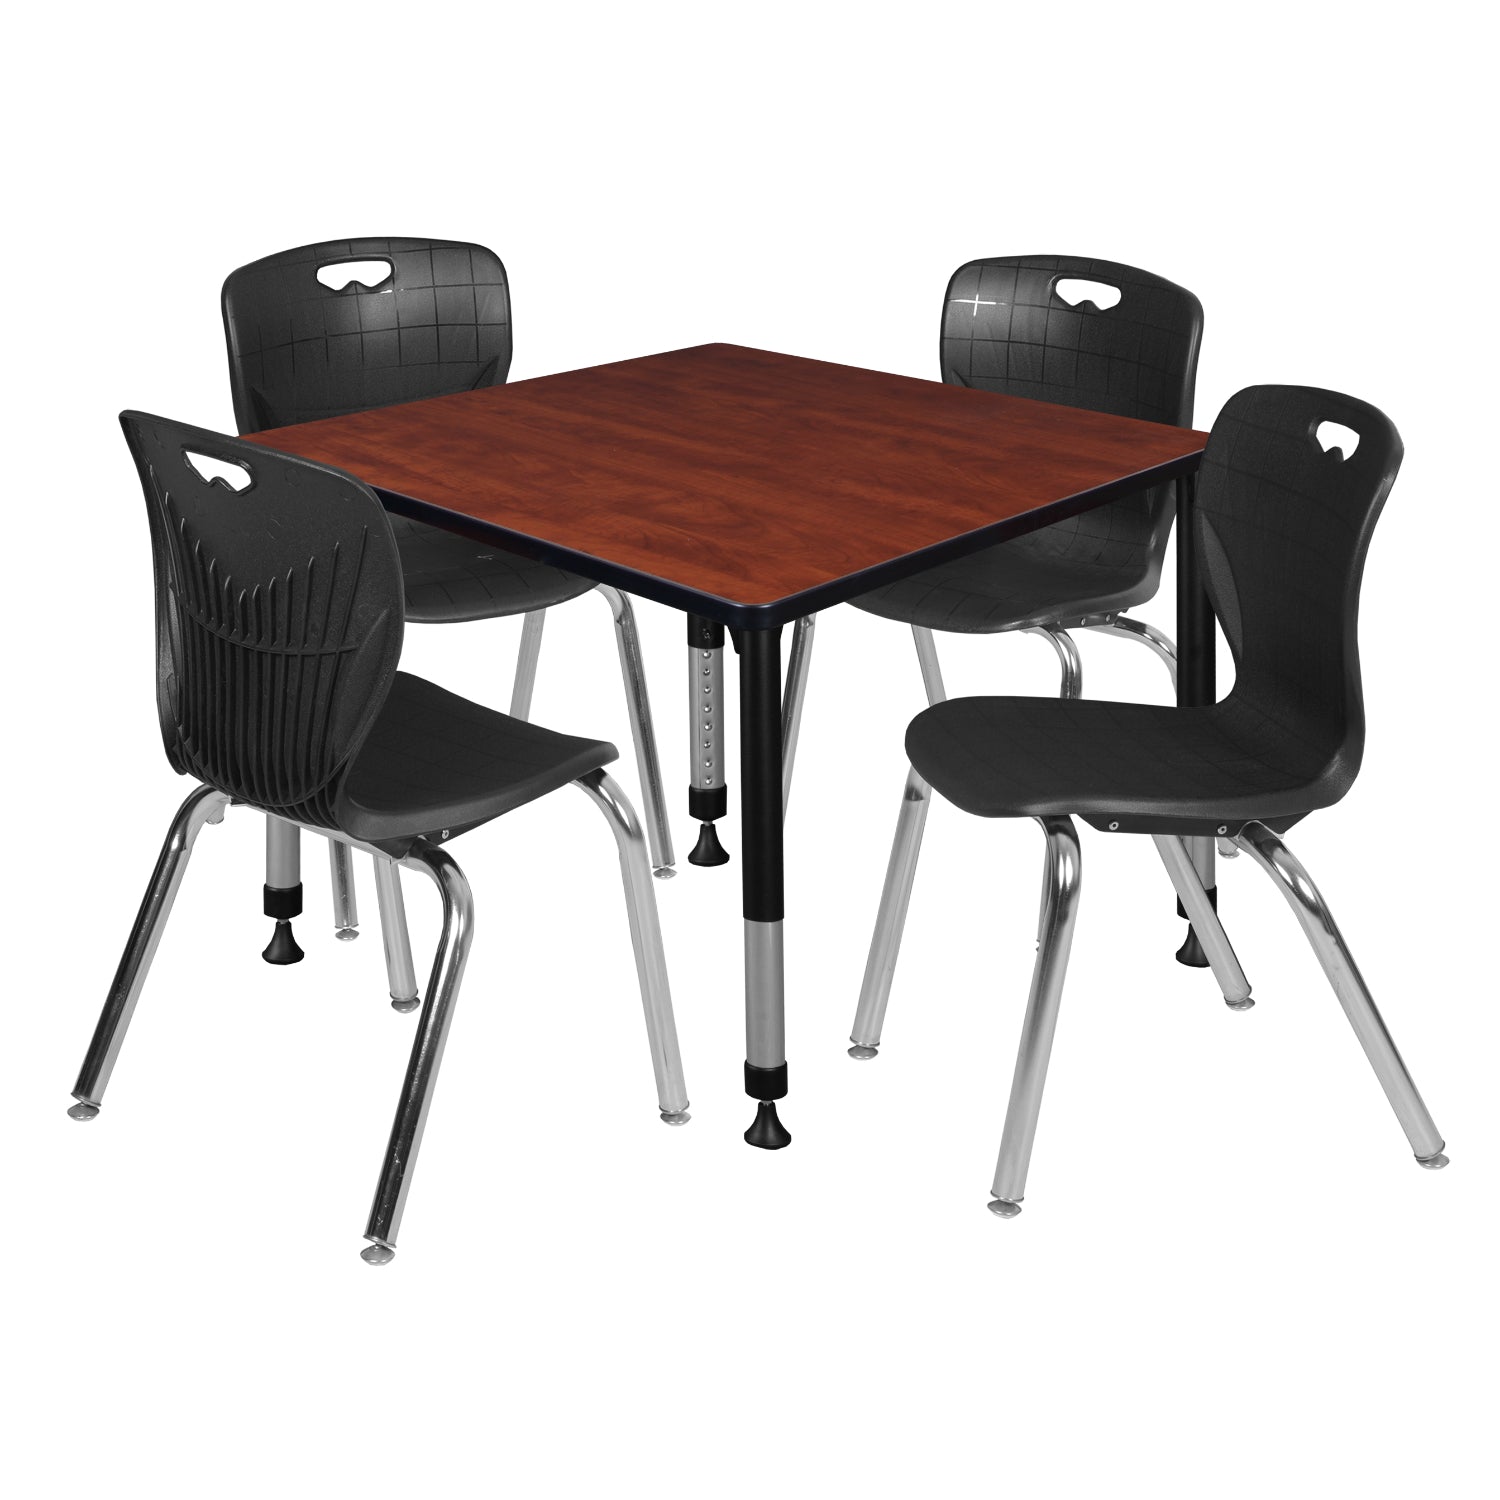 Kee Classroom Table and Chair Package, Kee 36" Square Adjustable Height Table with 4 Andy 18" Stack Chairs